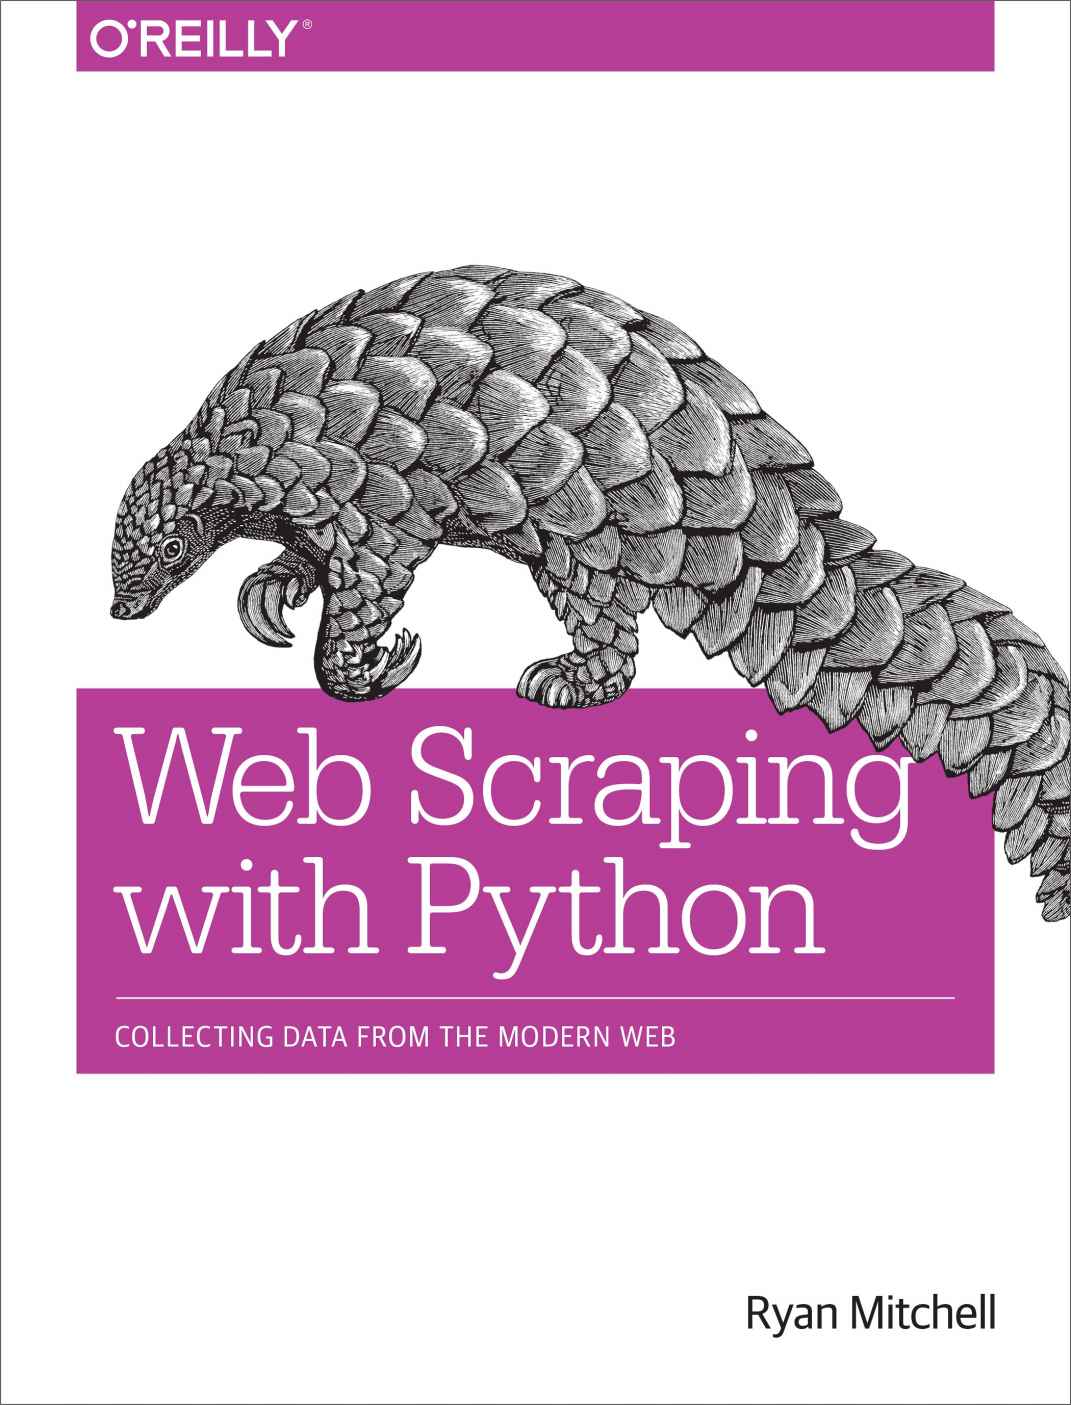 Web Scraping With Python: Collecting Data From the Modern Web